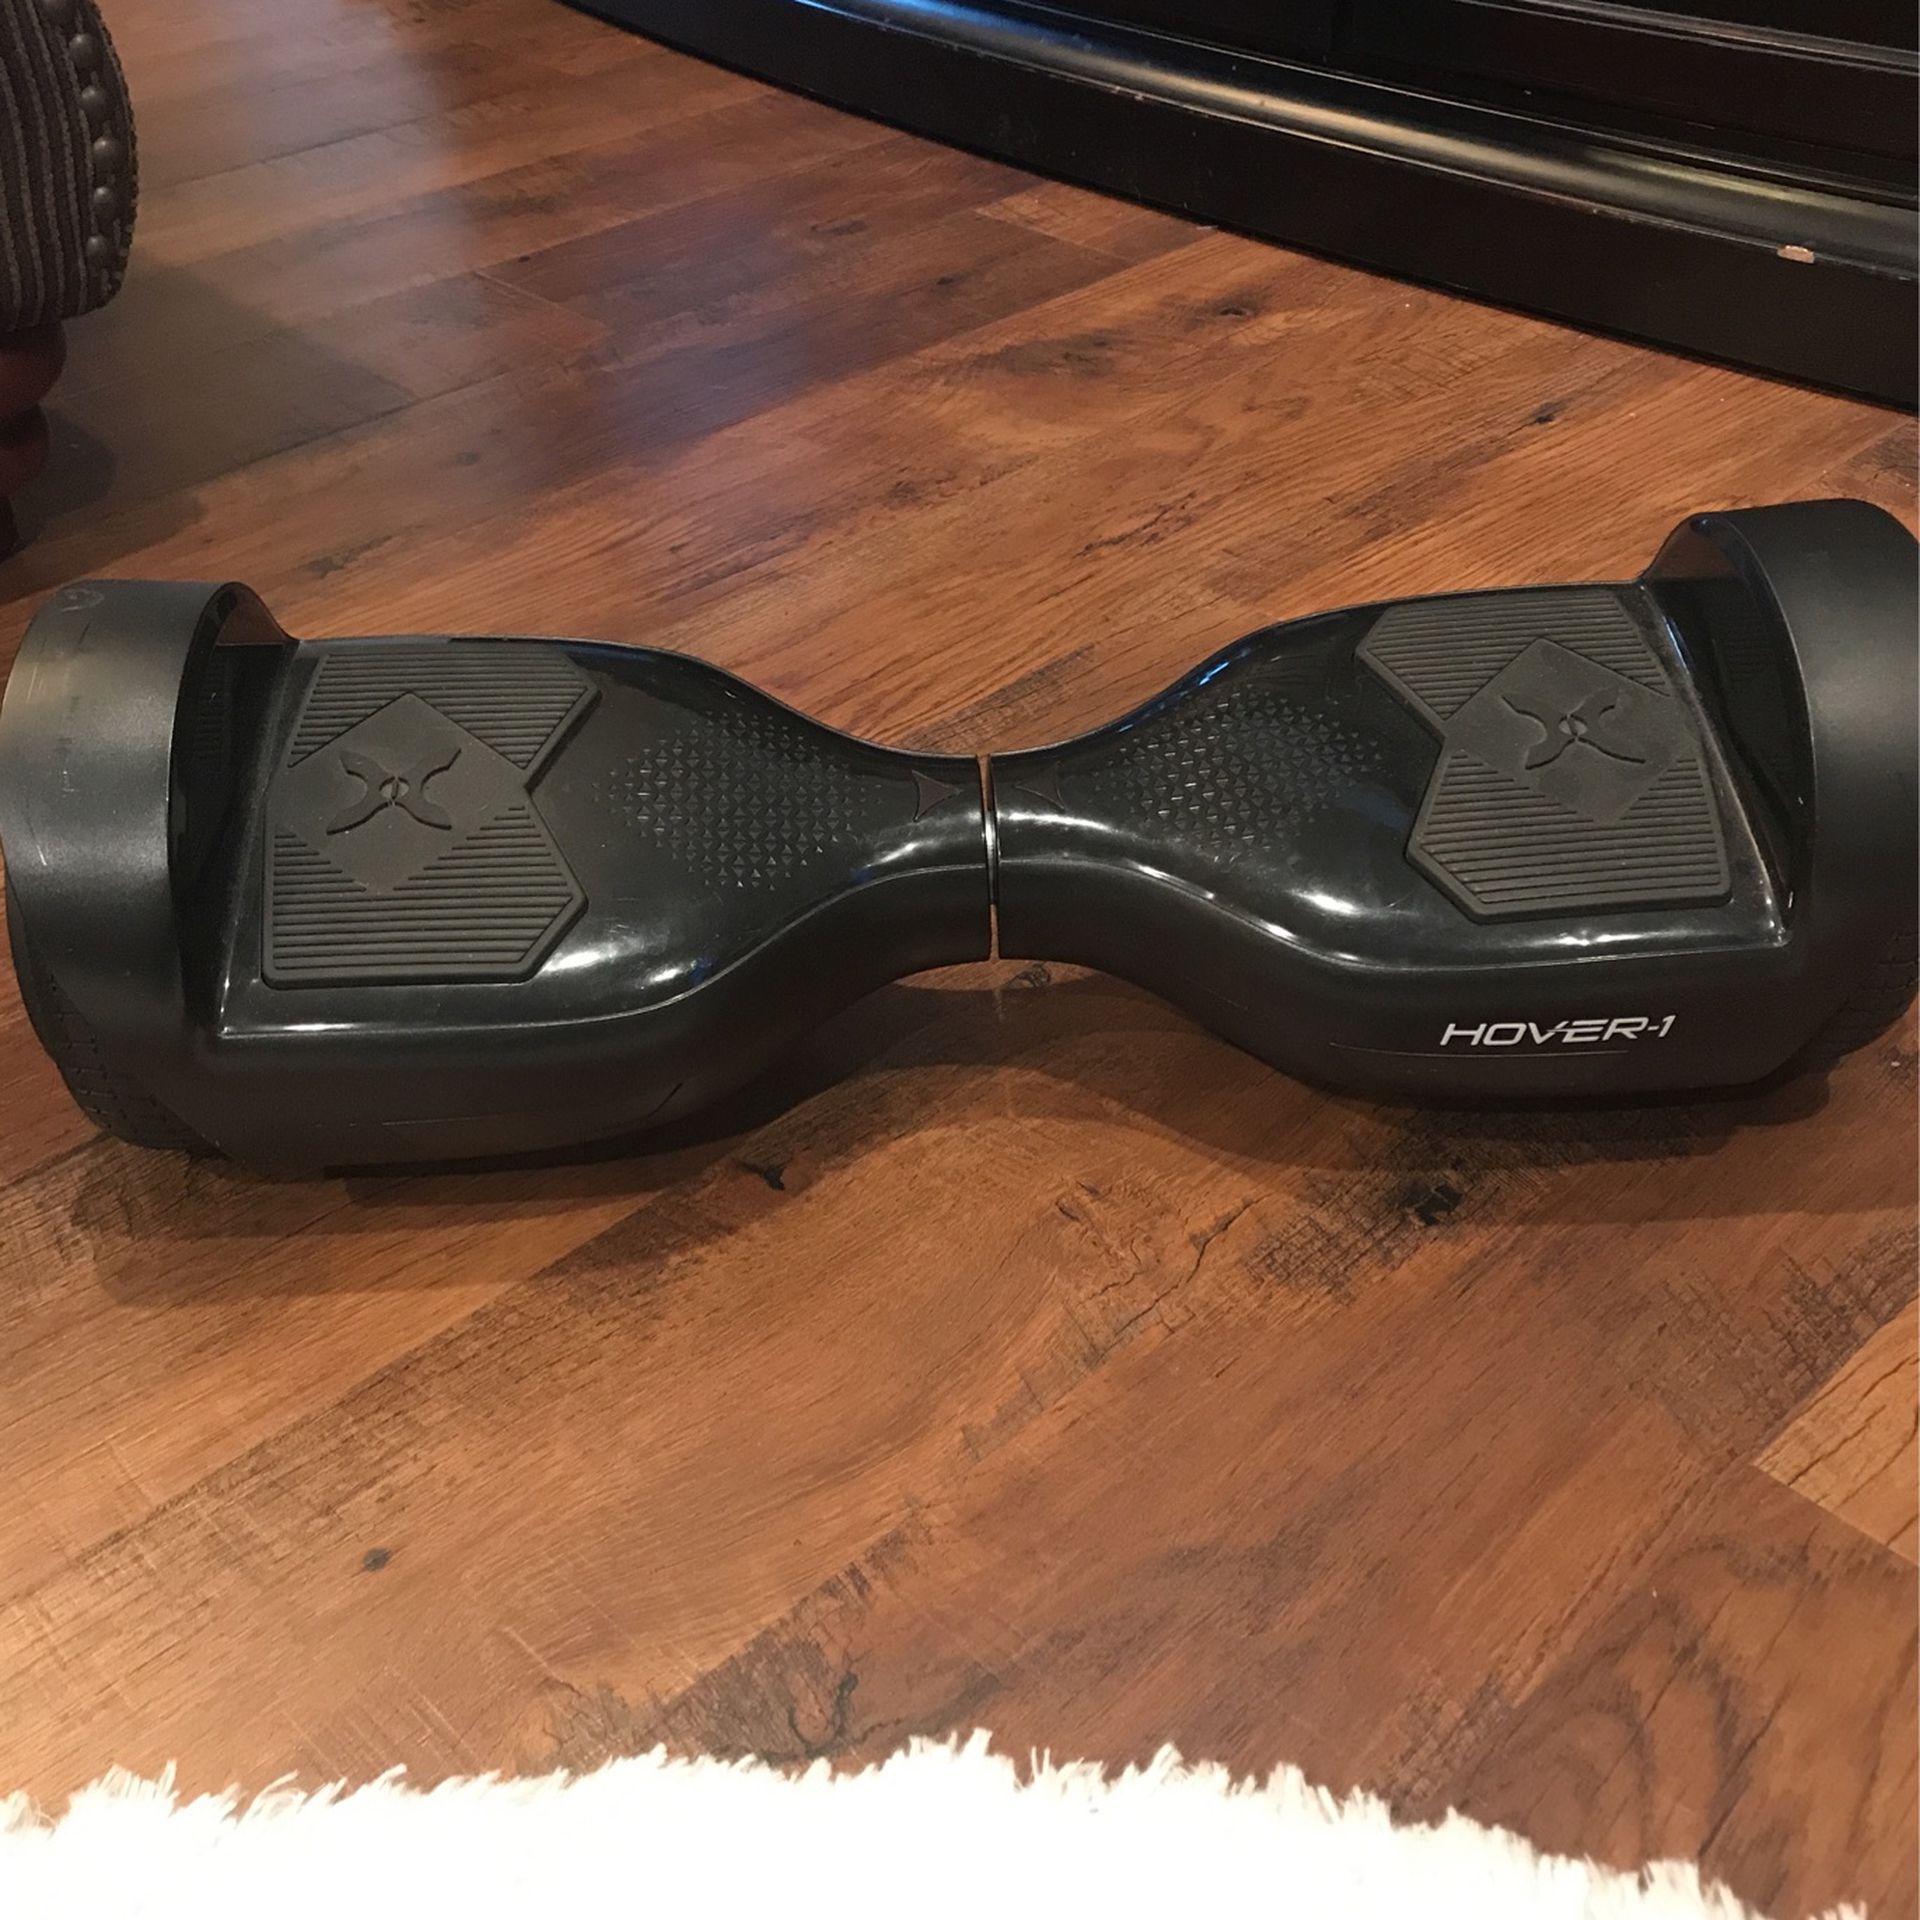 Hover-1 Black Hoverboard With Bluetooth Speakers